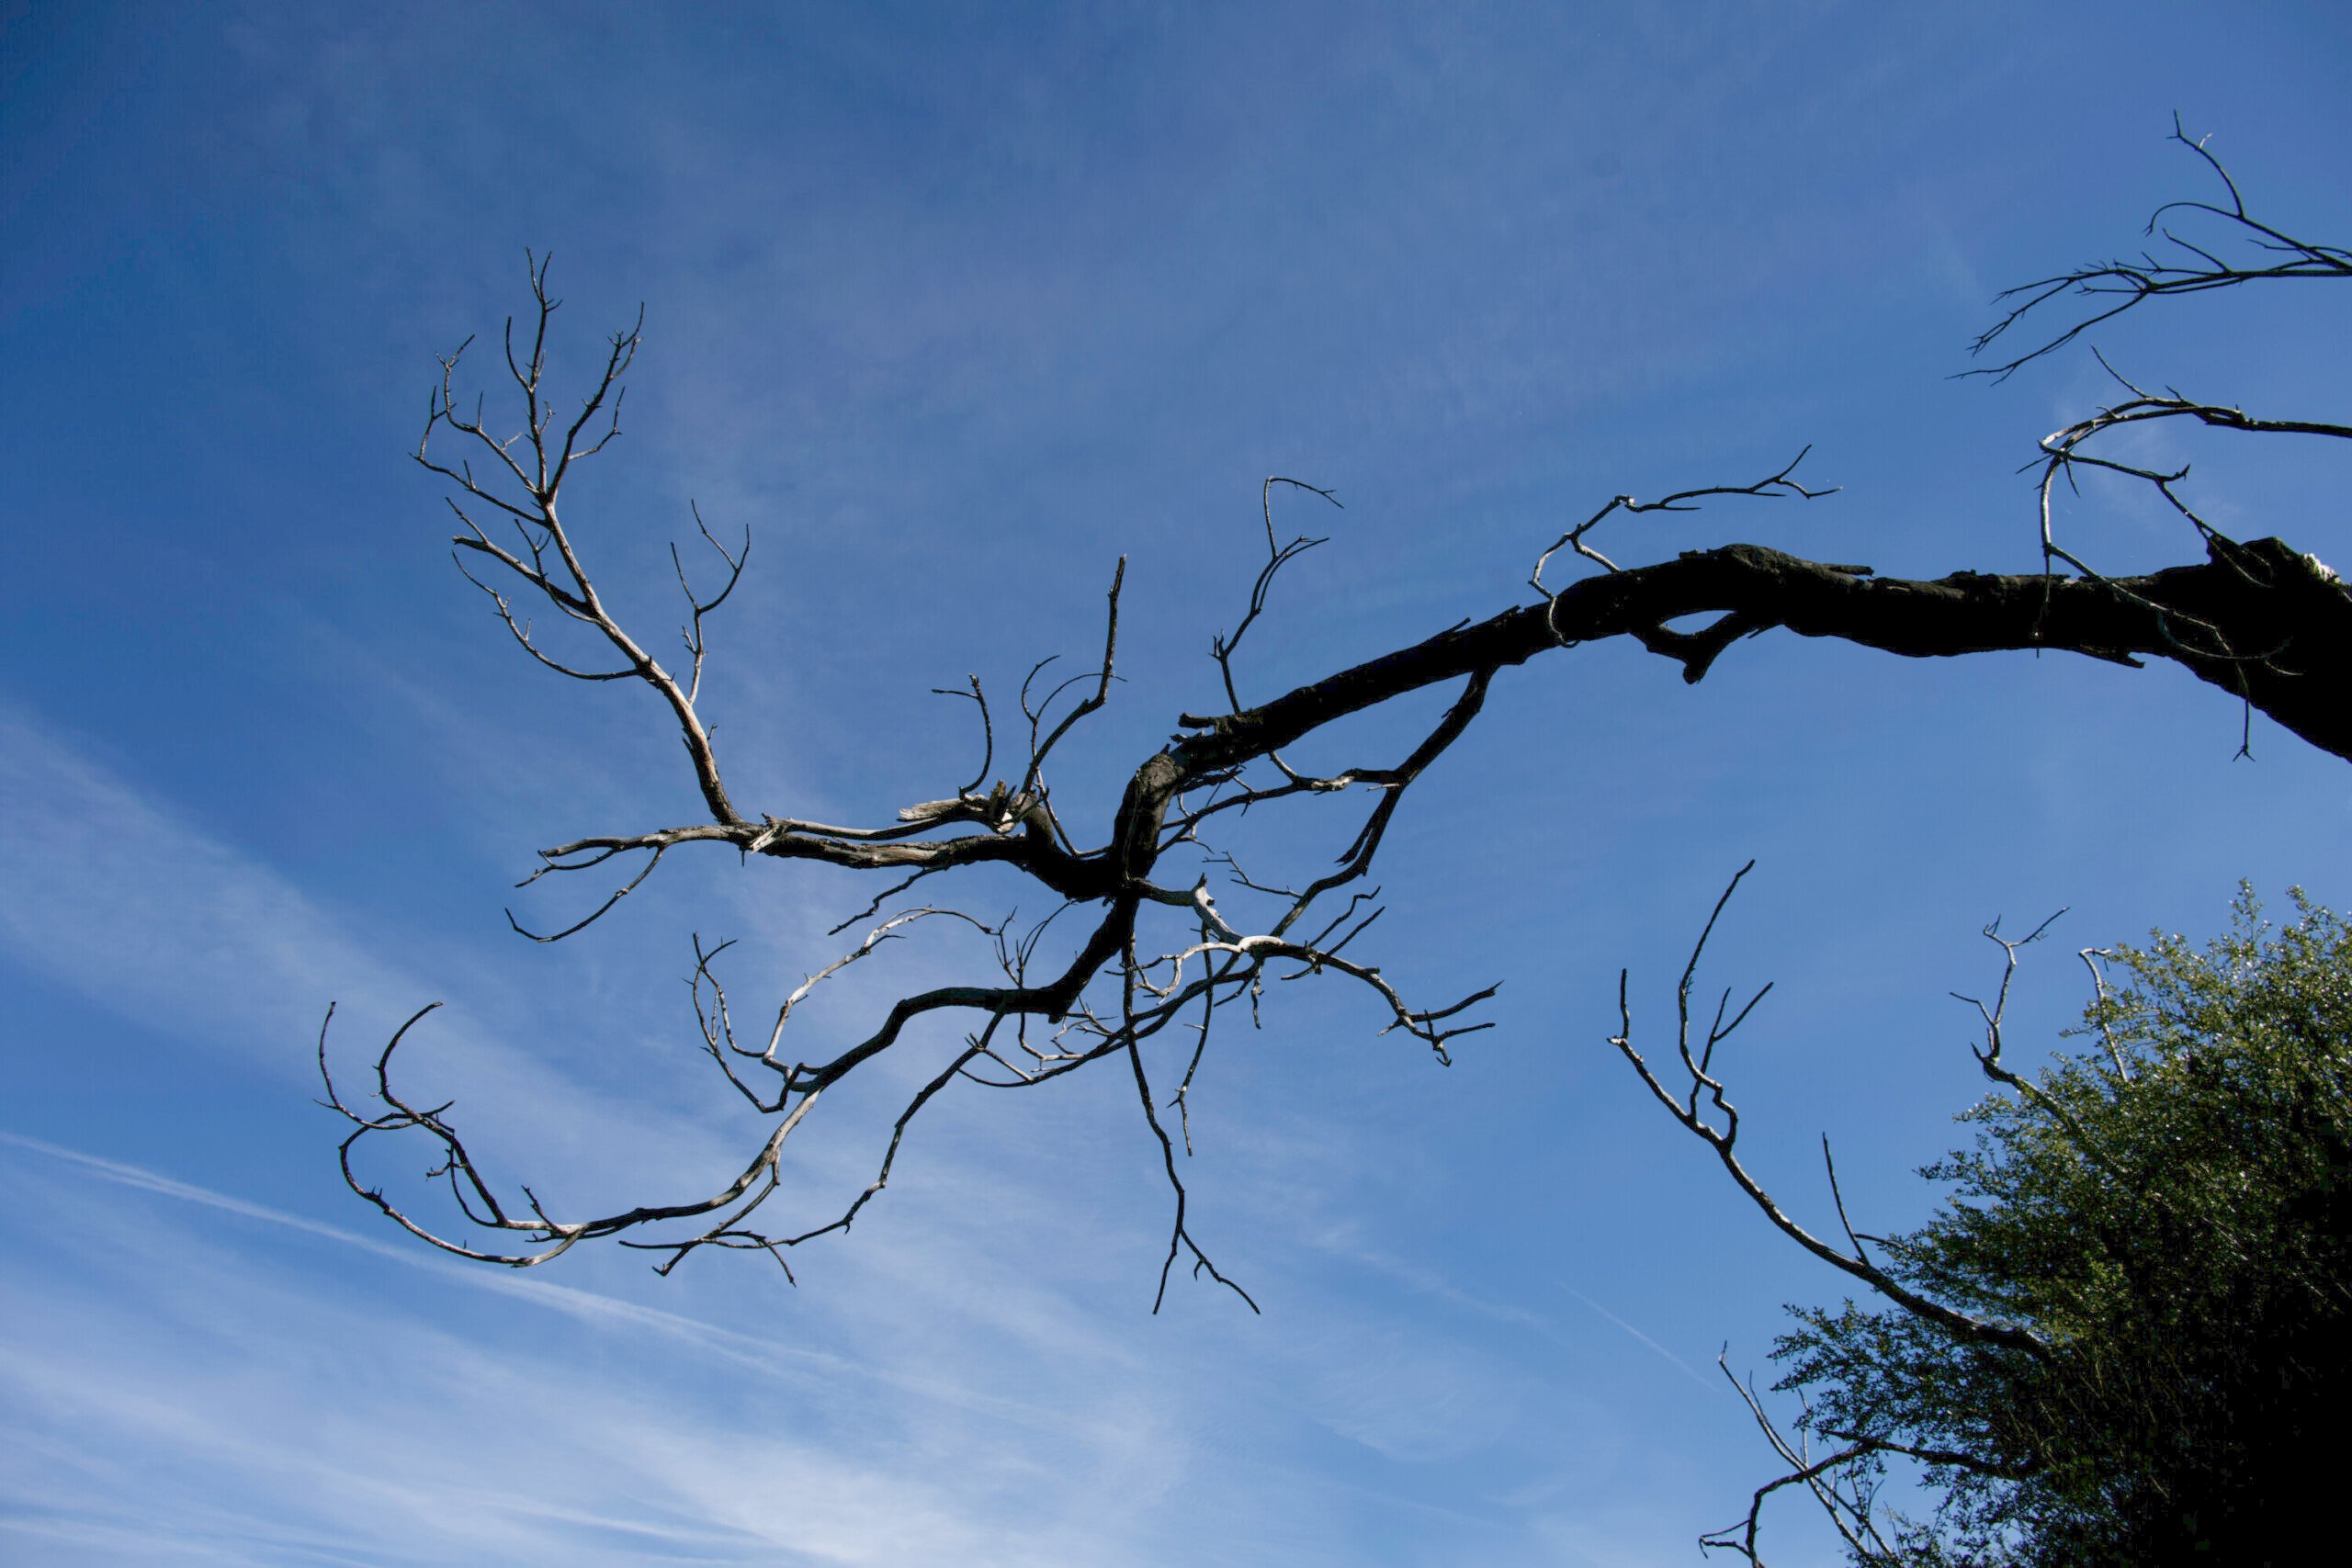 Bare tree branches silhouetted against a clear blue sky on the Backbone Trail in the Santa Monica Mountains.